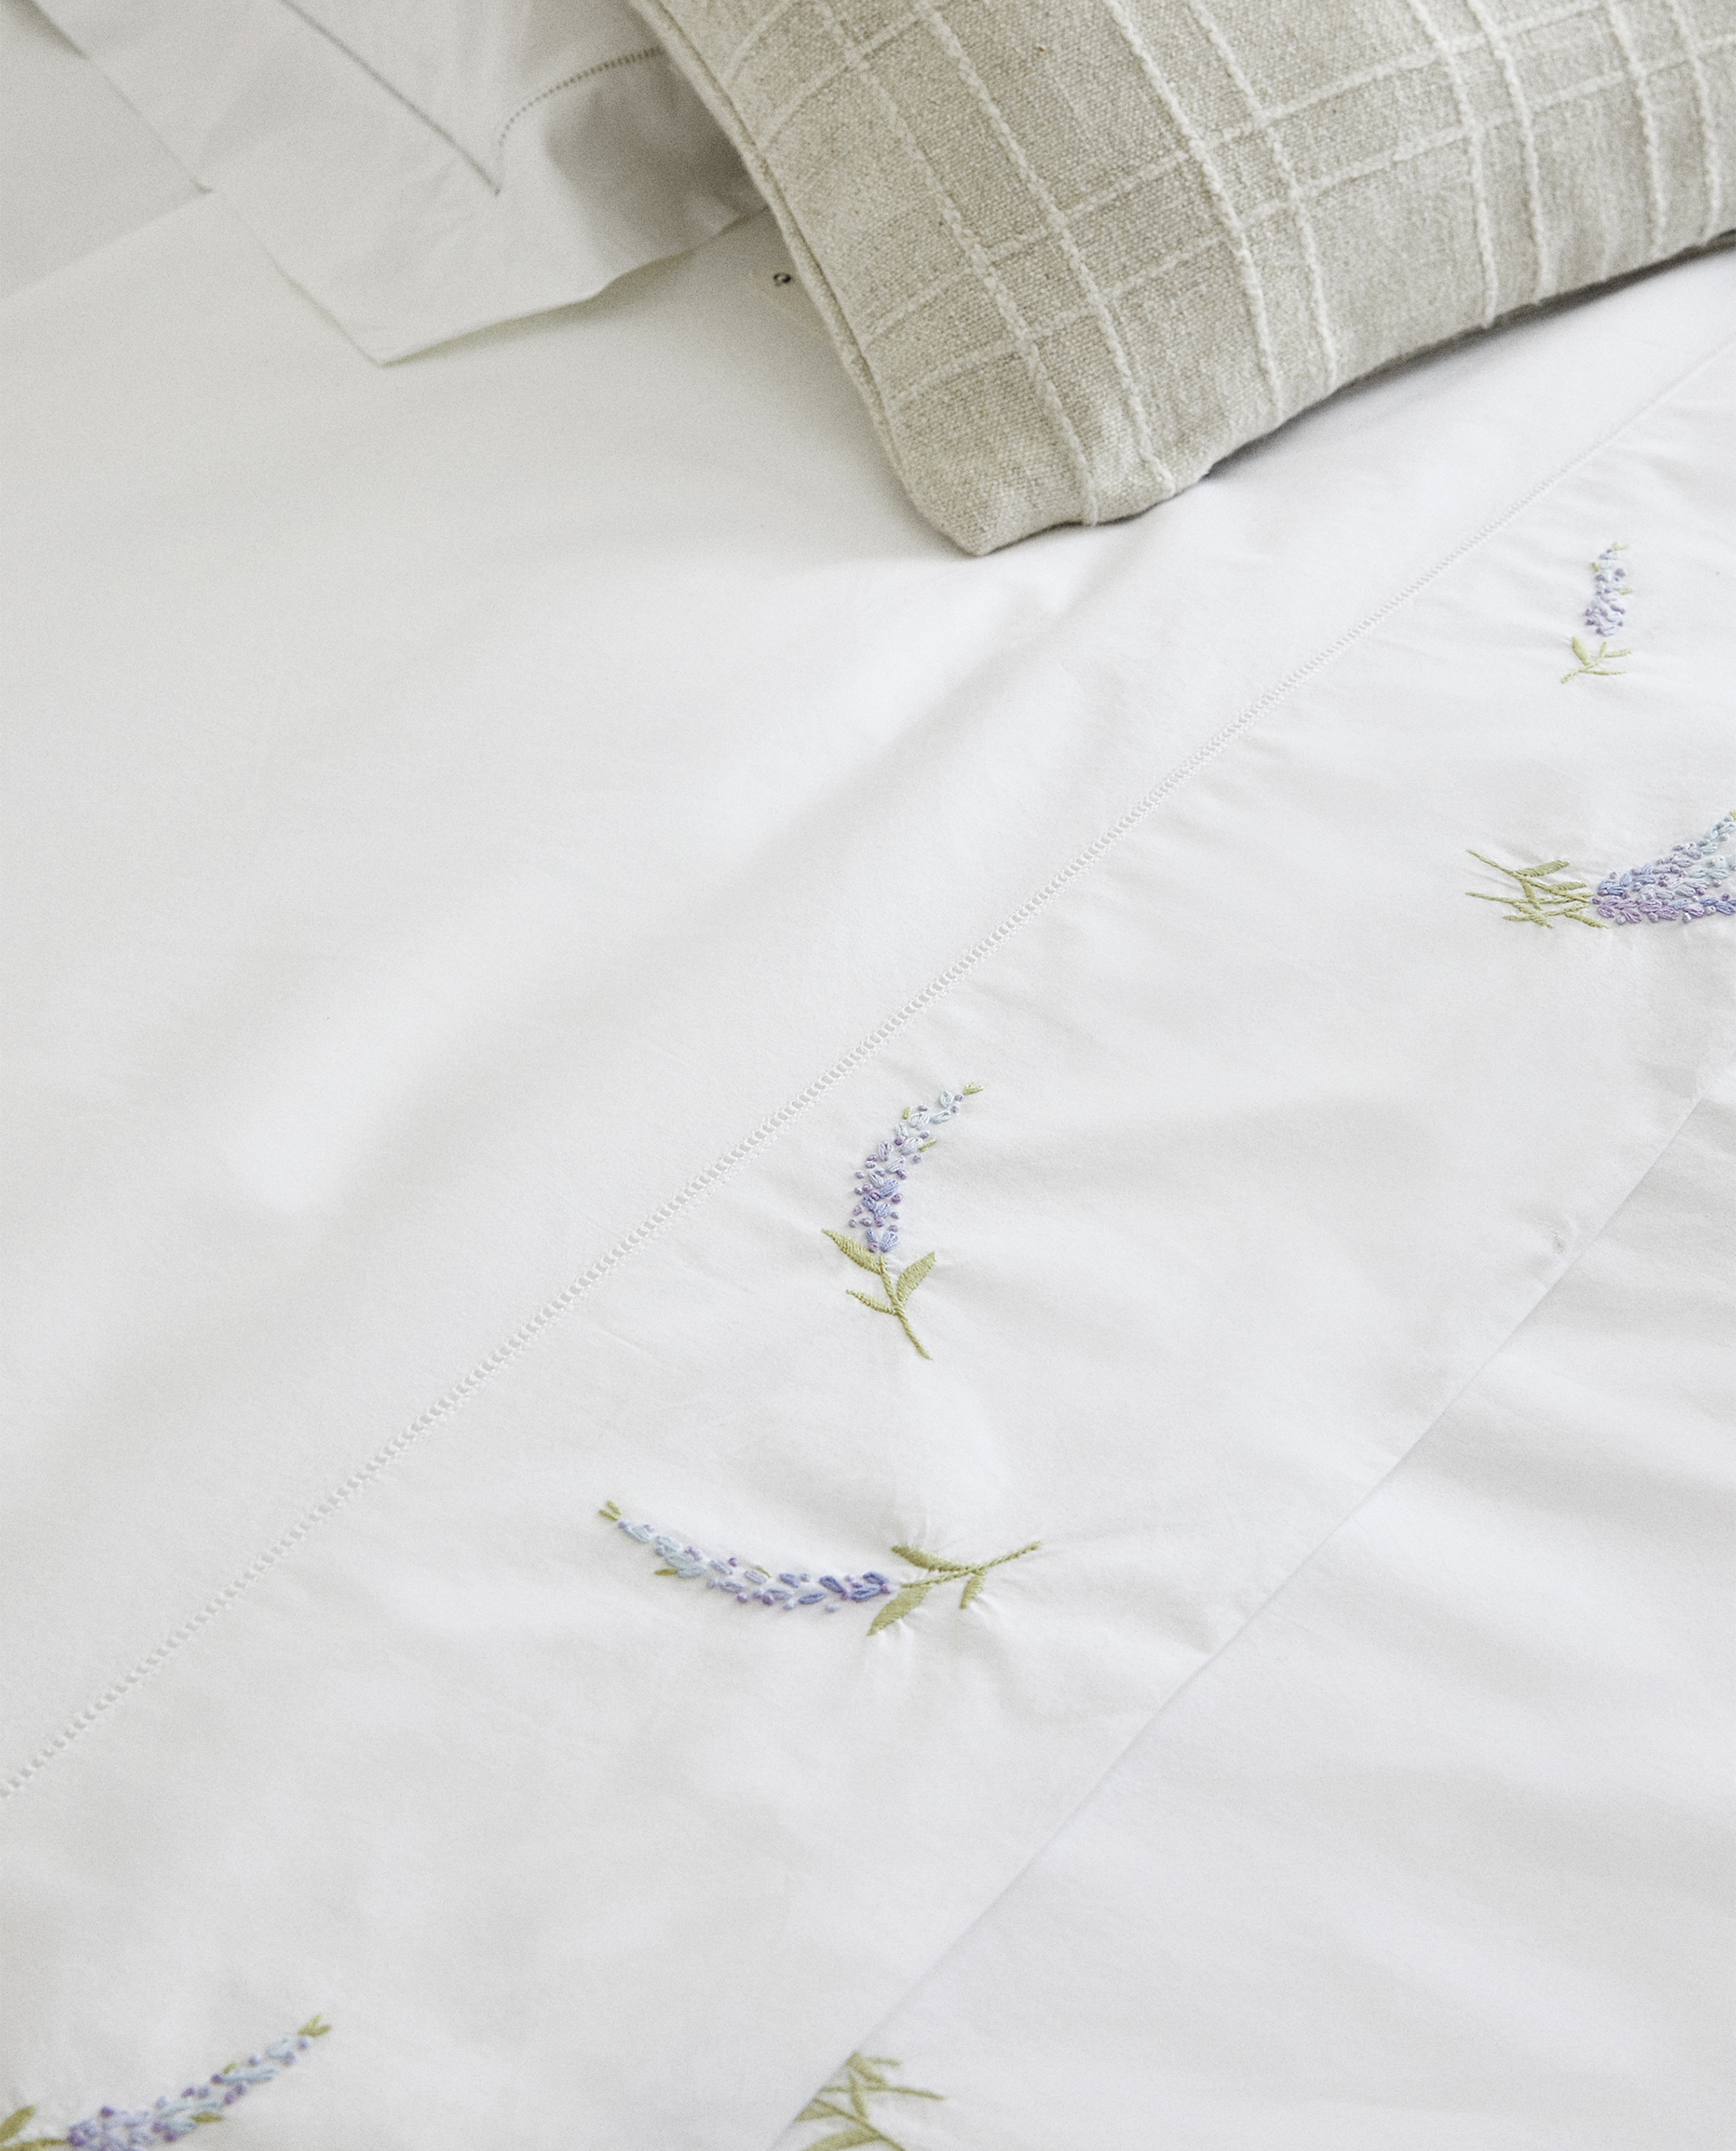 Duvet Cover With Lavender Embroidery Duvet Covers Bed Linen